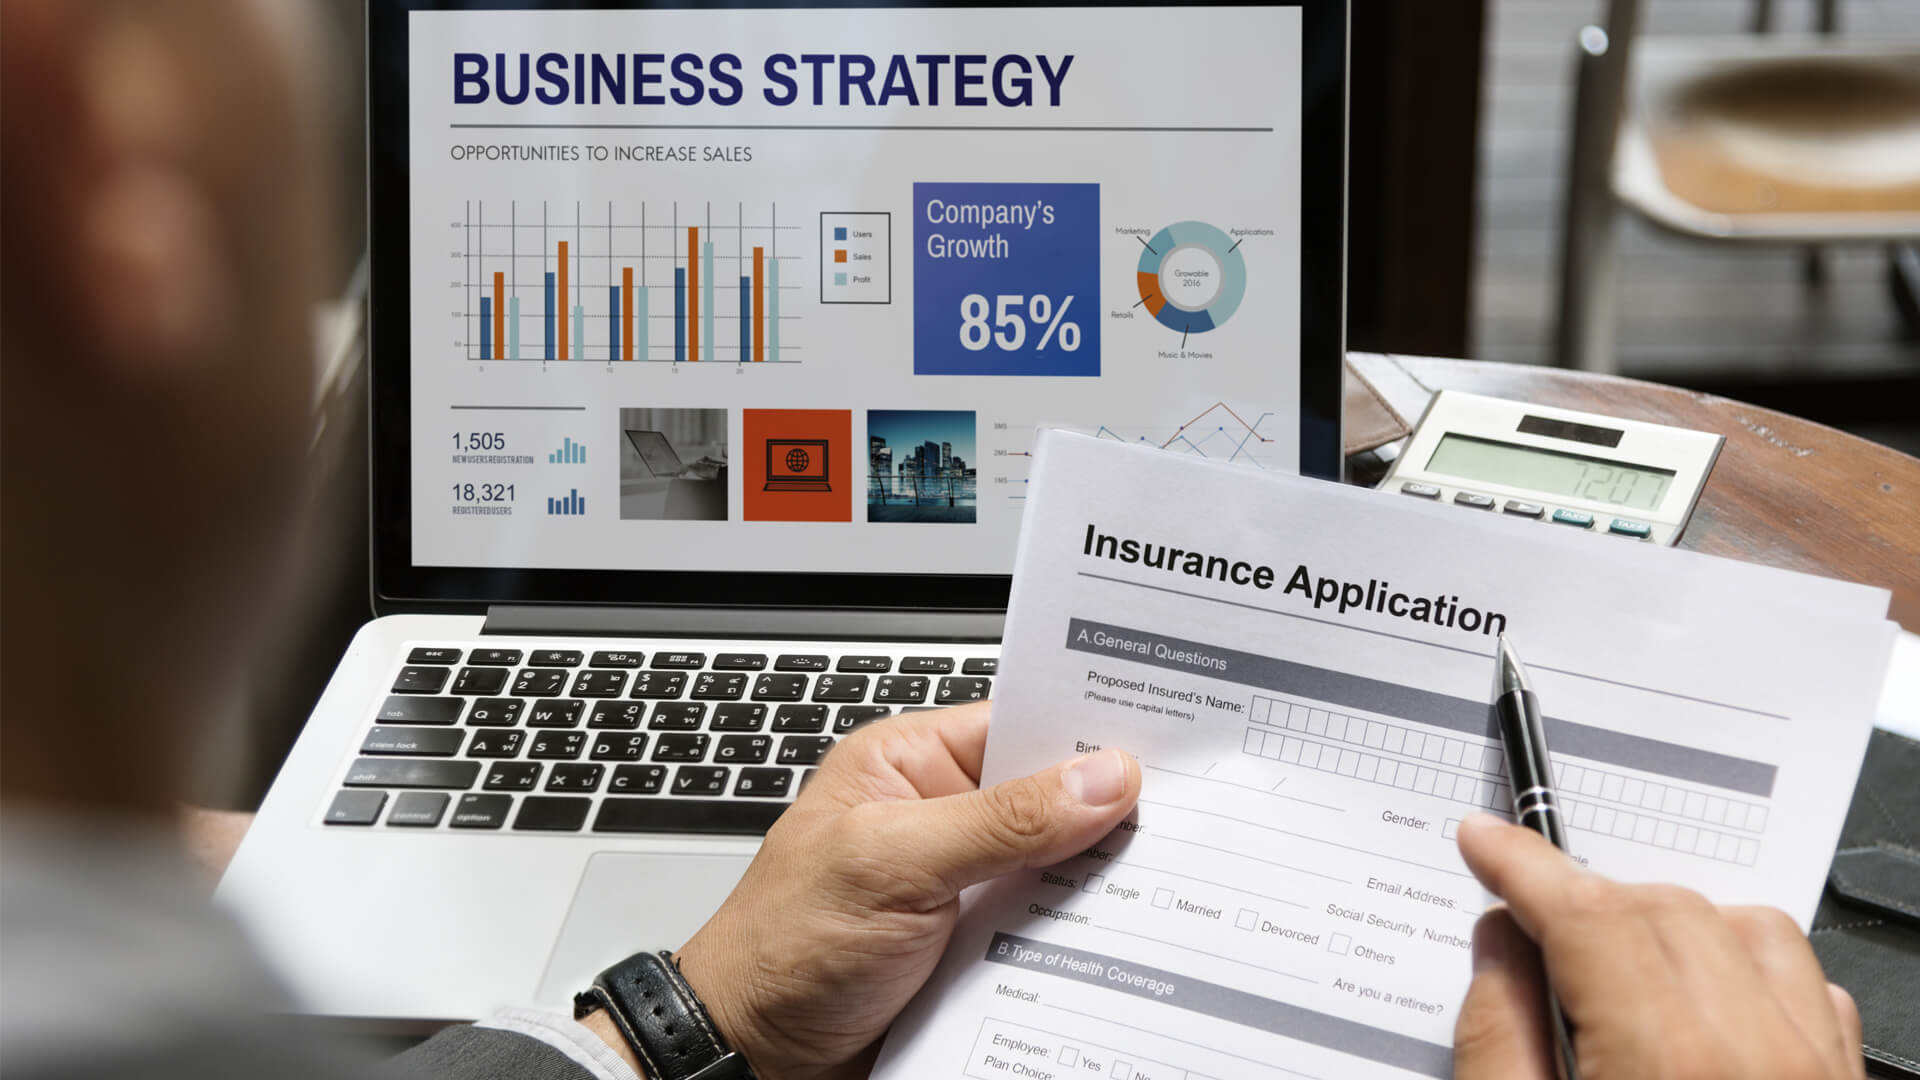 Intelligent Automation and Power BI Helps a Major Insurance TPA to Automate Insurance Approvals